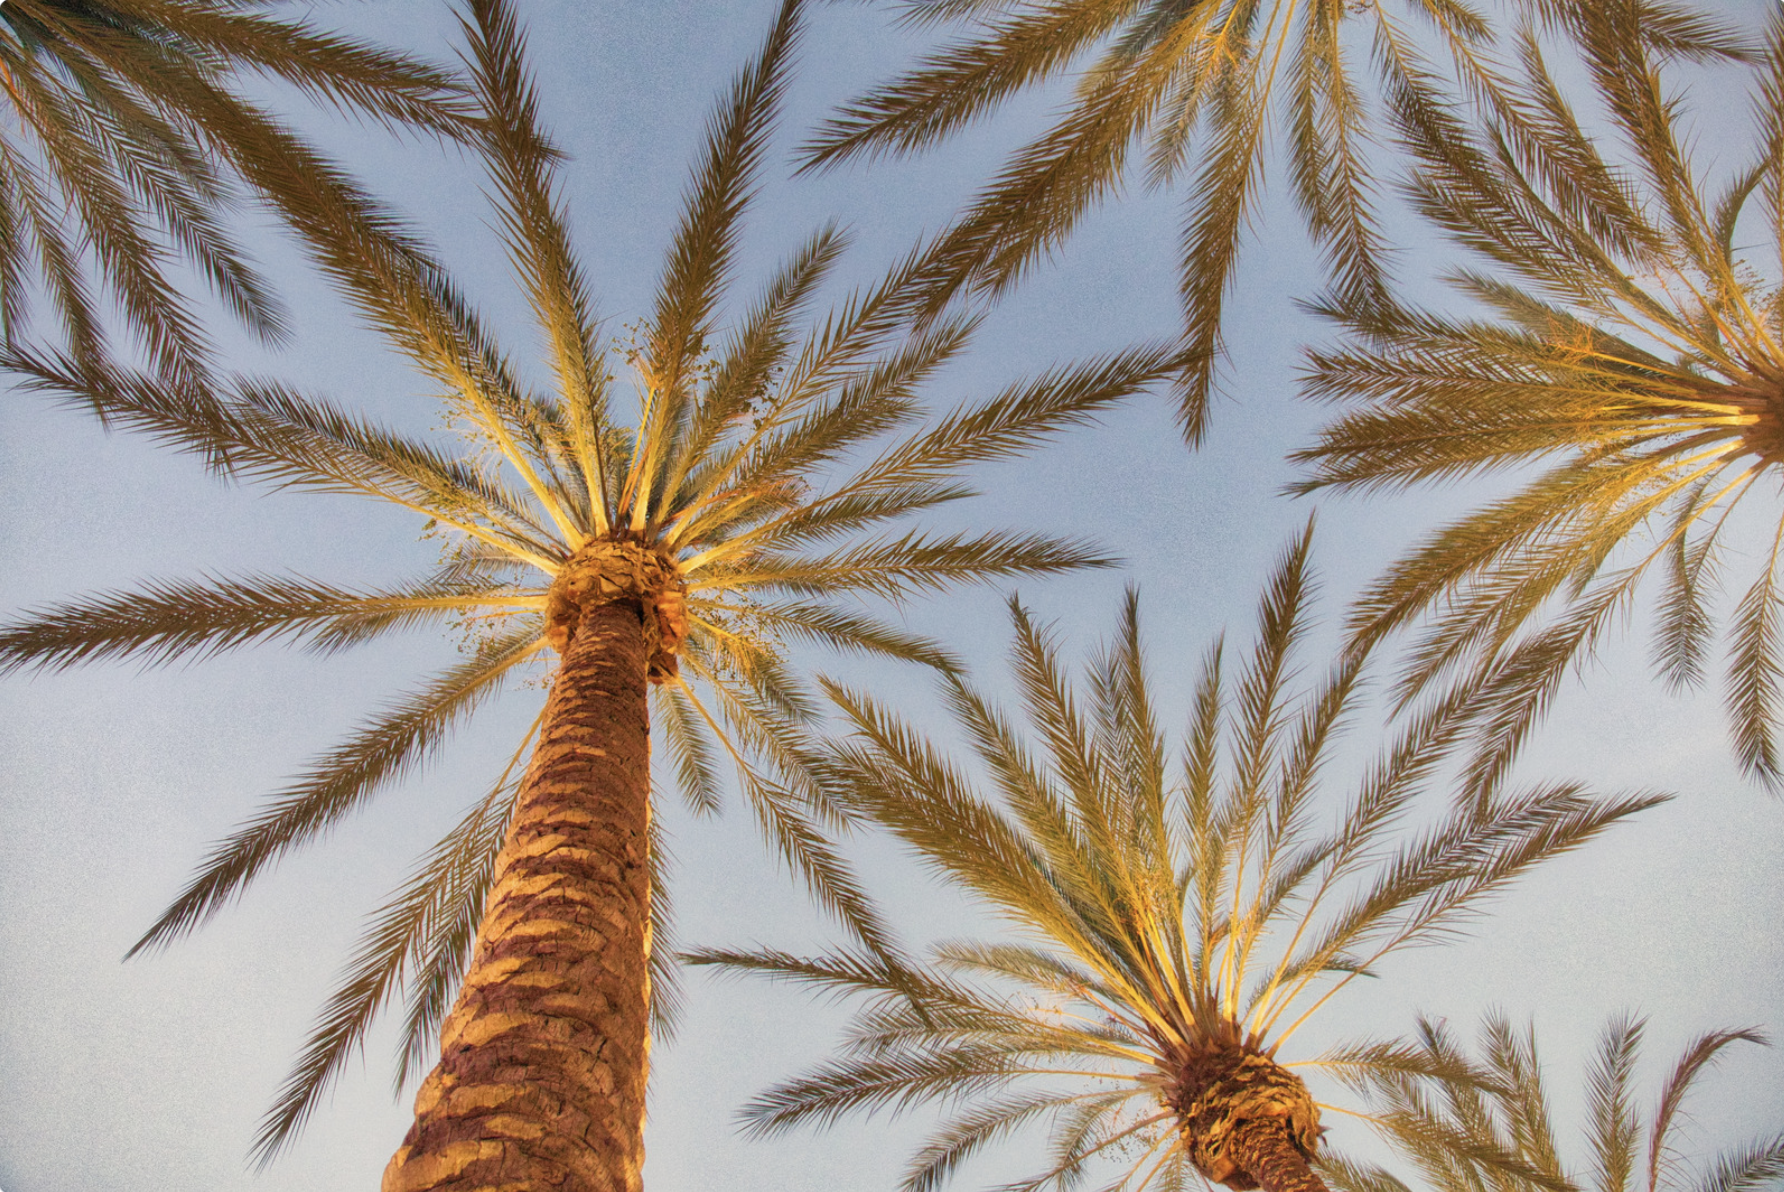 This is an image of a group of palm trees shining in the sunlight.